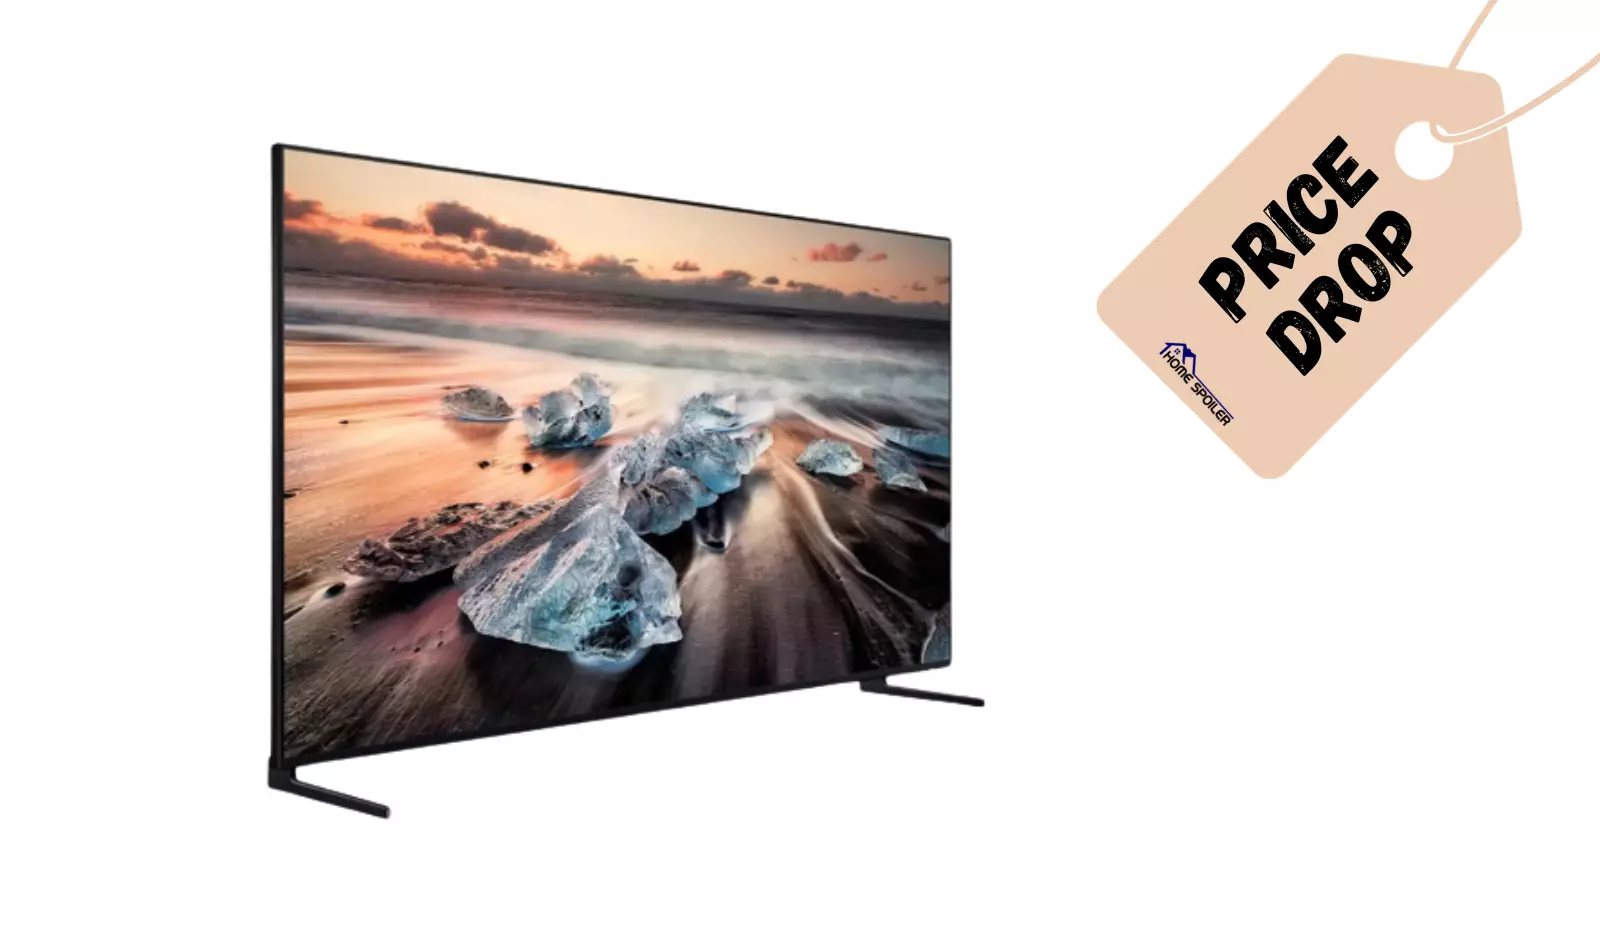 Deal Samsung's 65-inch 8K TV at $900 Off This Black Friday